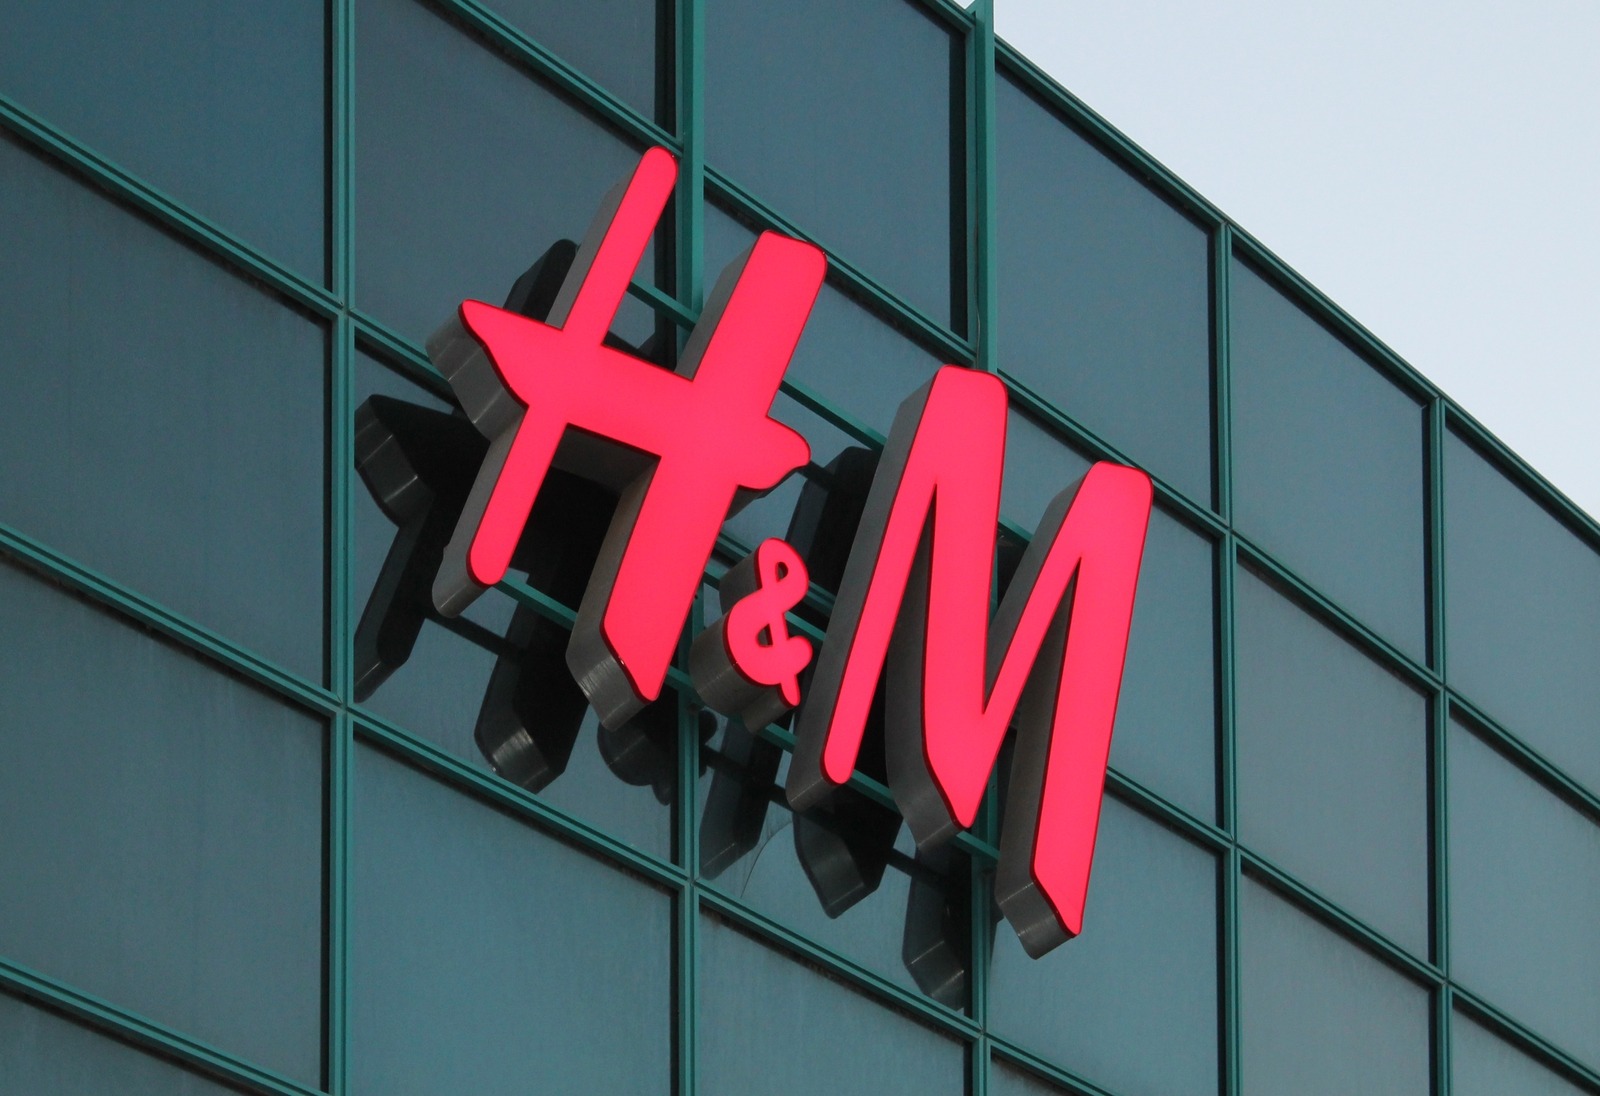 The H&M Greenwashing Scandal: Has Business Learned the Lesson